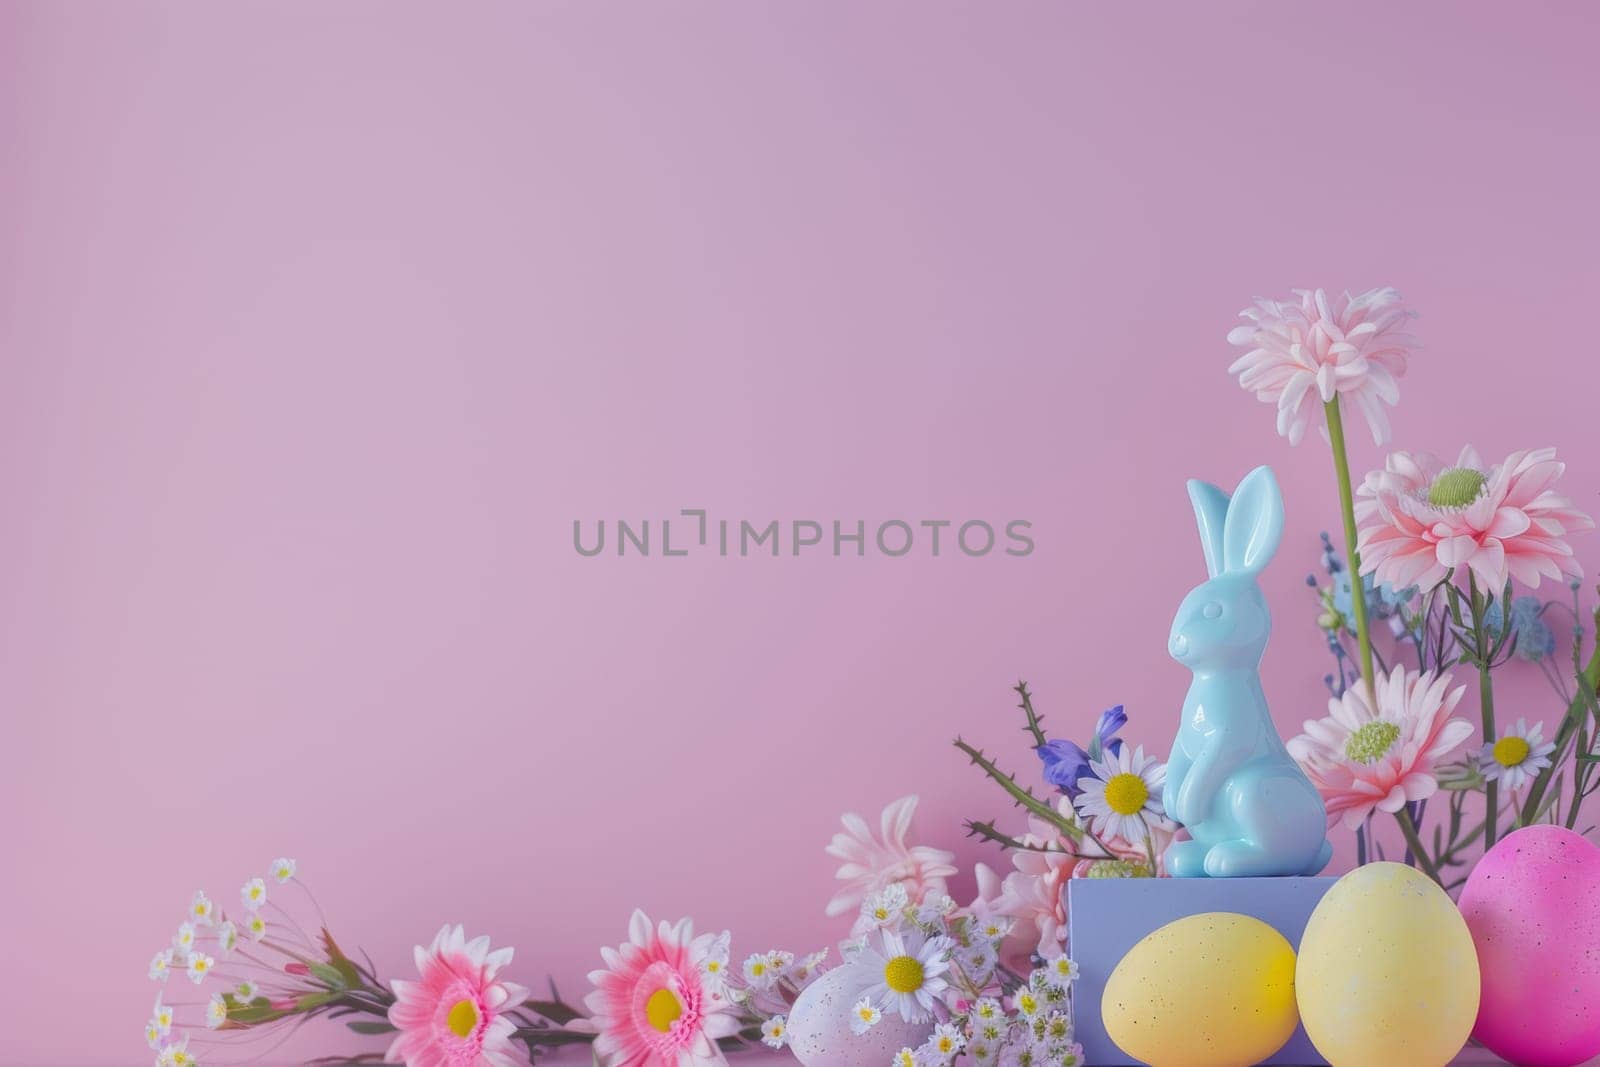 A pink and blue Easter bunny sits on a box of eggs and flowers. The scene is bright and cheerful, with the bunny